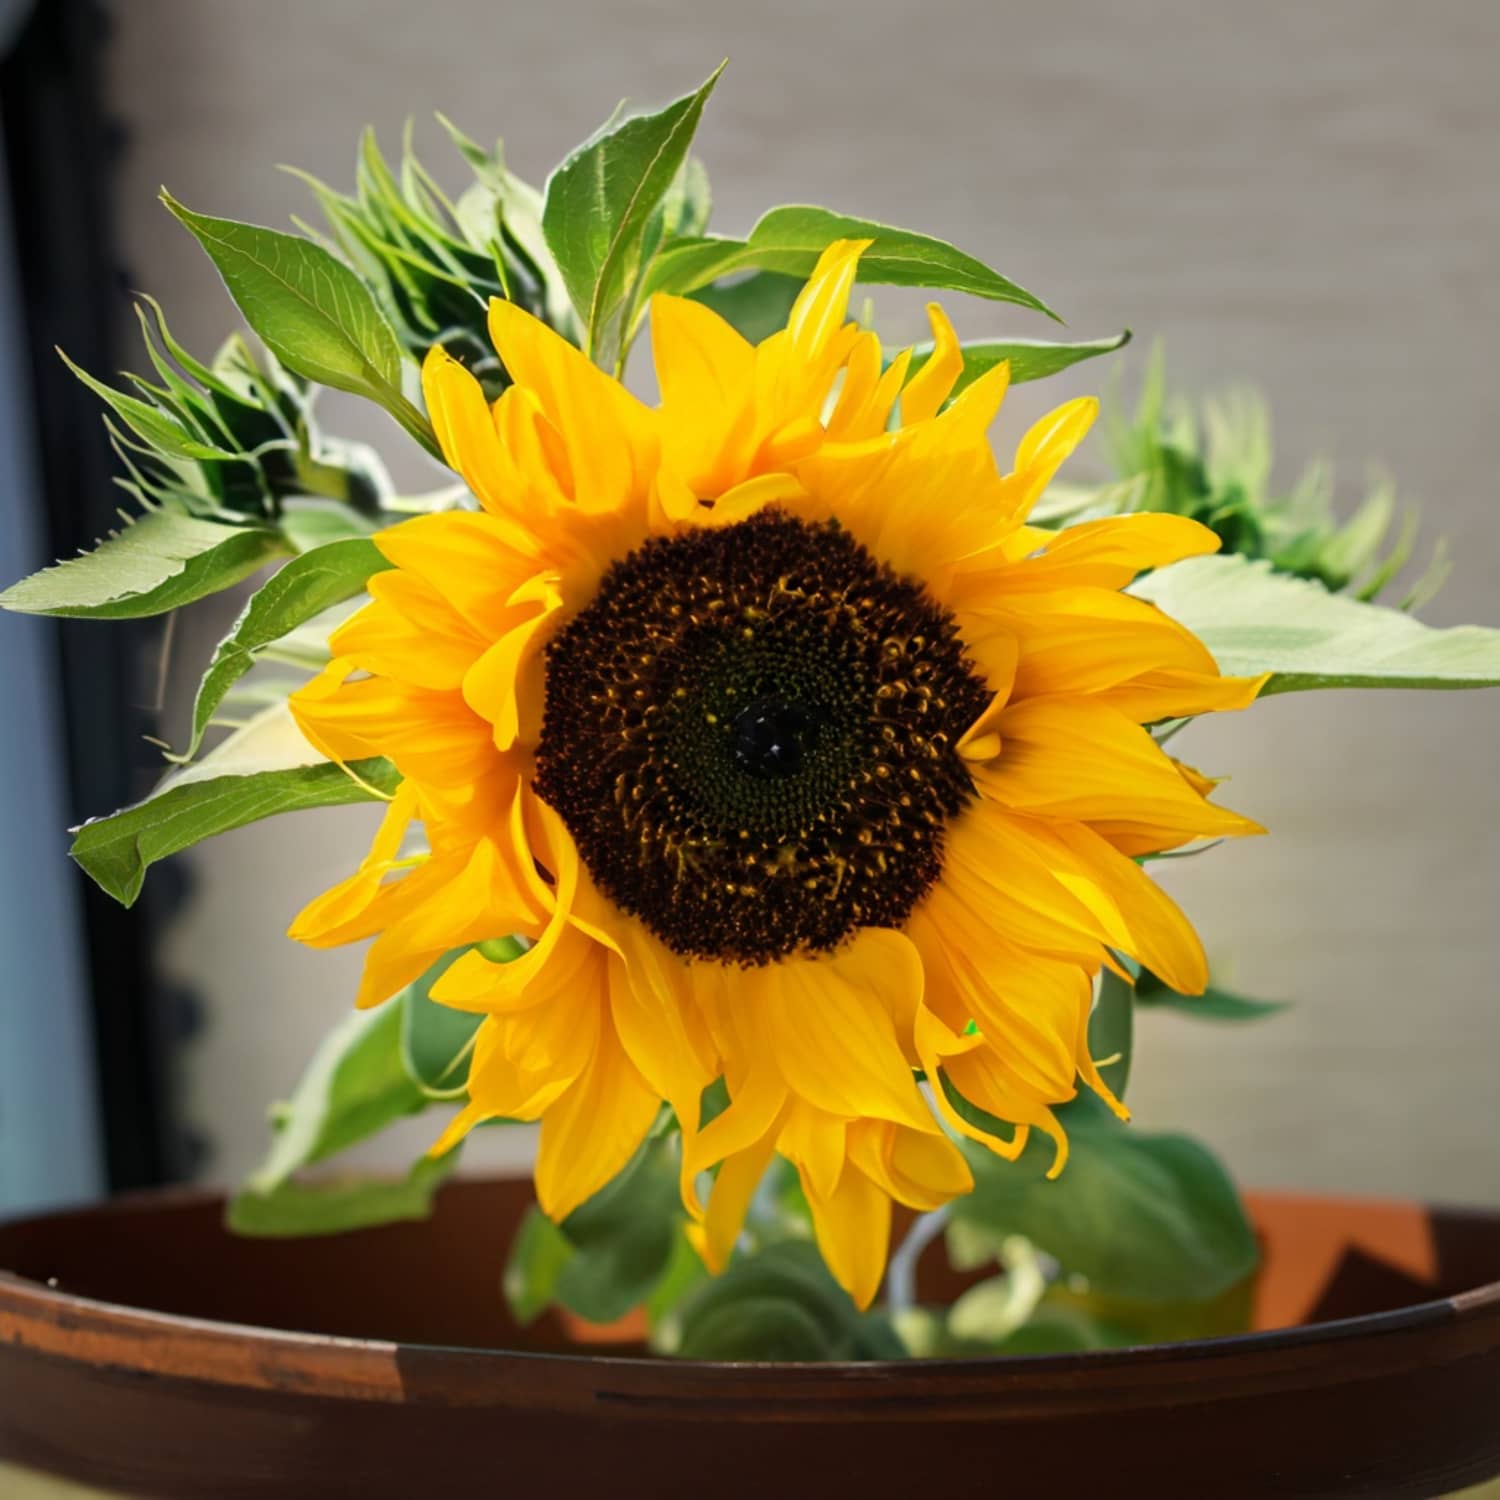 https://cdn.apartmenttherapy.info/image/upload/f_jpg,q_auto:eco,c_fill,g_auto,w_1500,ar_1:1/at%2Fhome-projects%2F2023-08%2Fgrowing-sunflowers-in-pots%2Fclose-up-potted-sunflower-shutterstock_2322131063